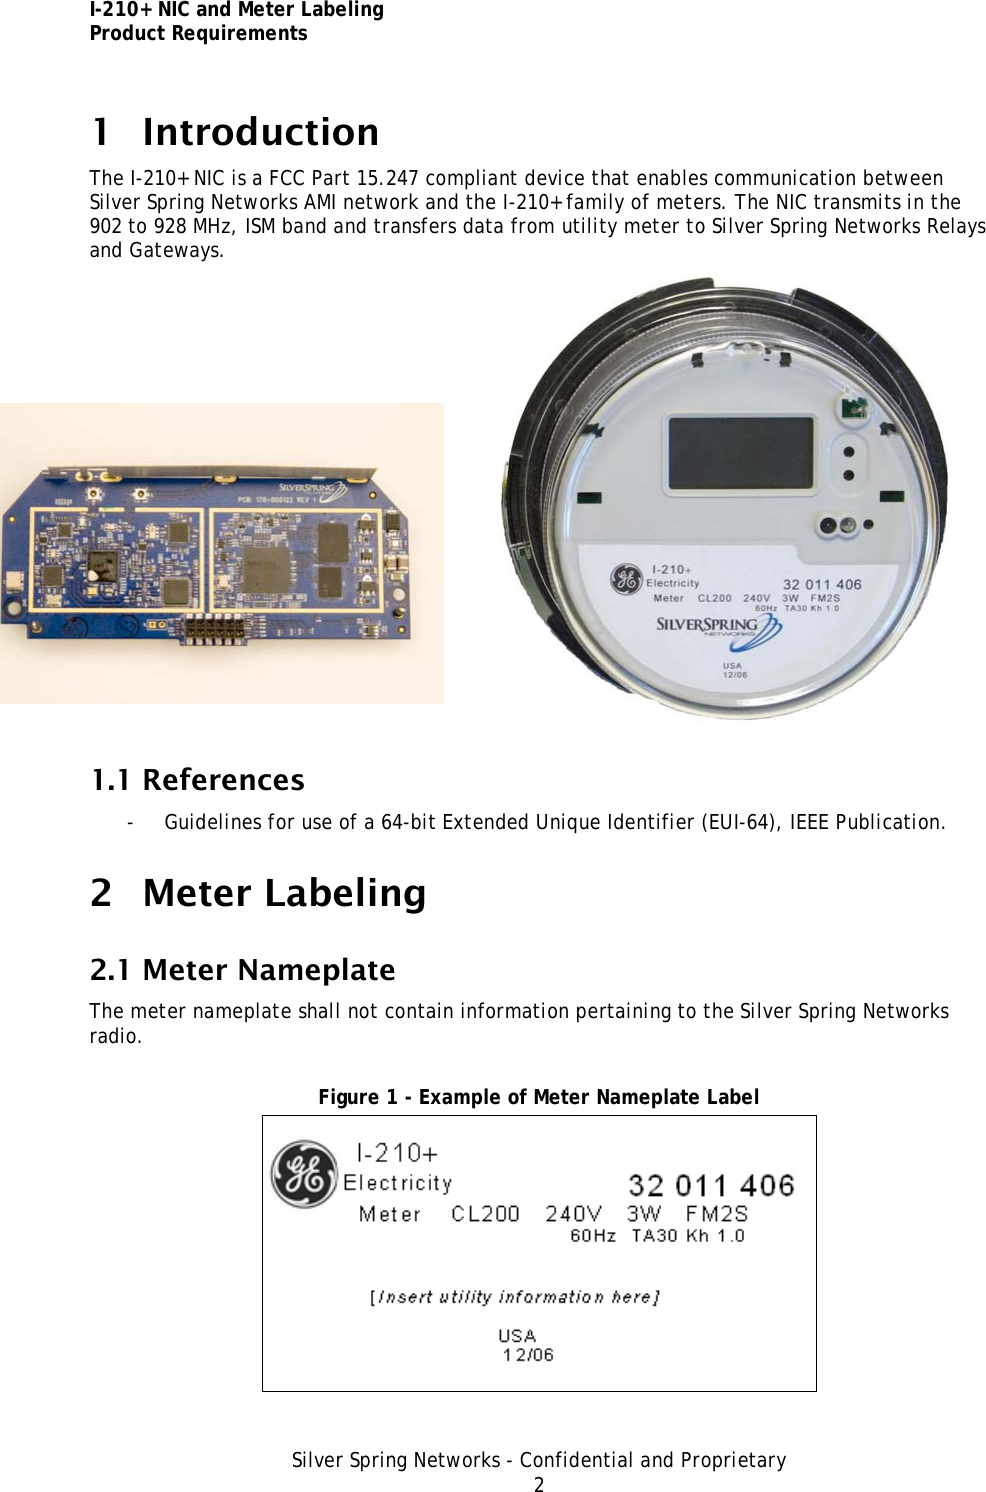 I-210+ NIC and Meter Labeling Product Requirements Silver Spring Networks - Confidential and Proprietary 2 1 Introduction The I-210+ NIC is a FCC Part 15.247 compliant device that enables communication between Silver Spring Networks AMI network and the I-210+ family of meters. The NIC transmits in the 902 to 928 MHz, ISM band and transfers data from utility meter to Silver Spring Networks Relays and Gateways.  1.1 References - Guidelines for use of a 64-bit Extended Unique Identifier (EUI-64), IEEE Publication. 2 Meter Labeling 2.1 Meter Nameplate The meter nameplate shall not contain information pertaining to the Silver Spring Networks radio.  Figure 1 - Example of Meter Nameplate Label  